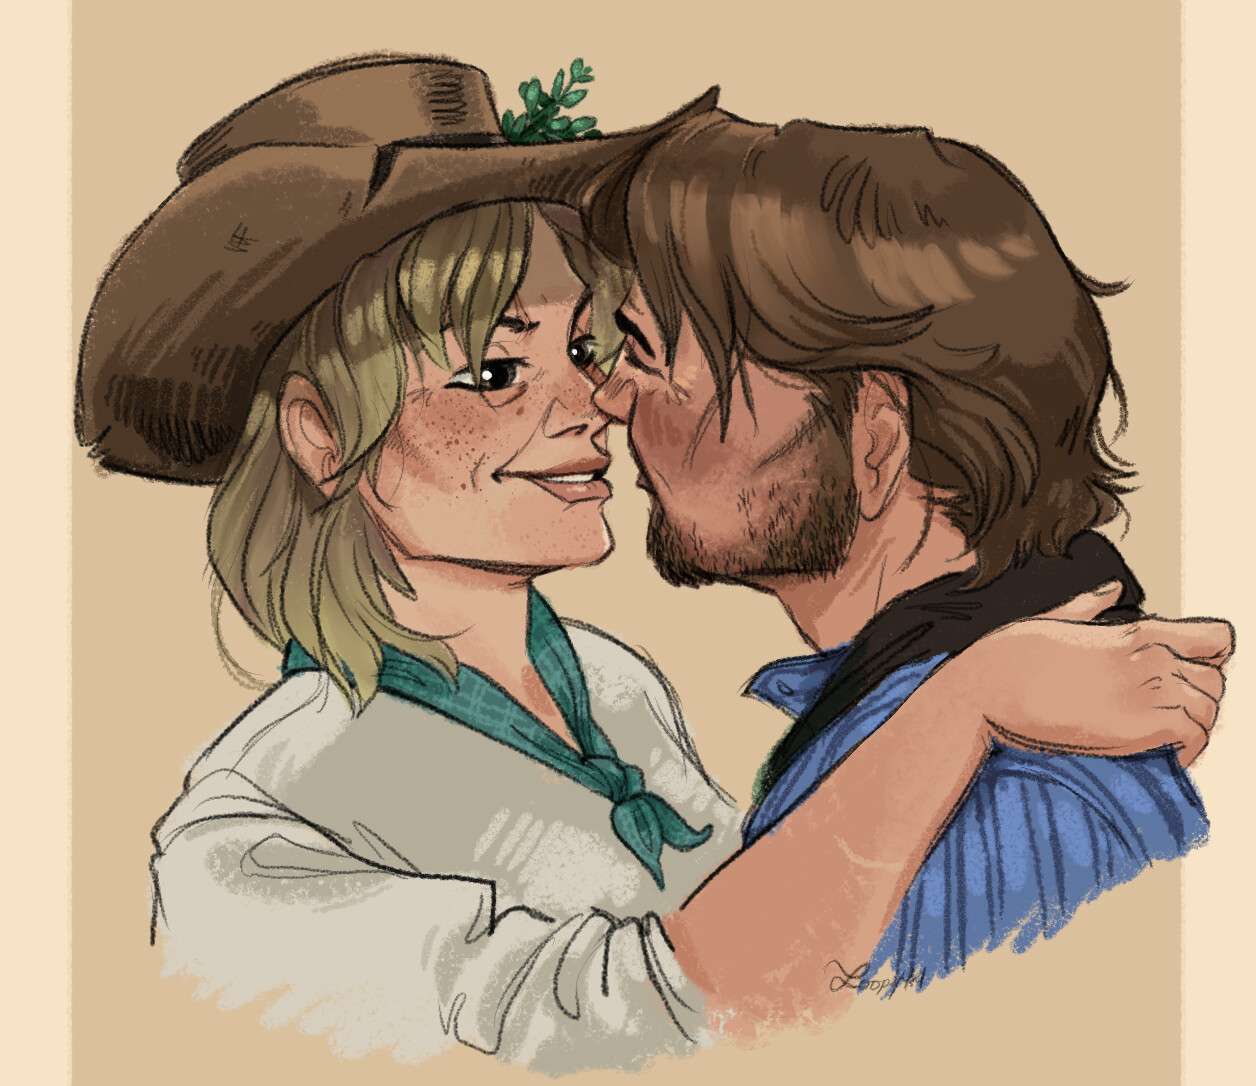 Sadie Adler and Arthur Morgan from red dead 2, made as a secret santa gift ...